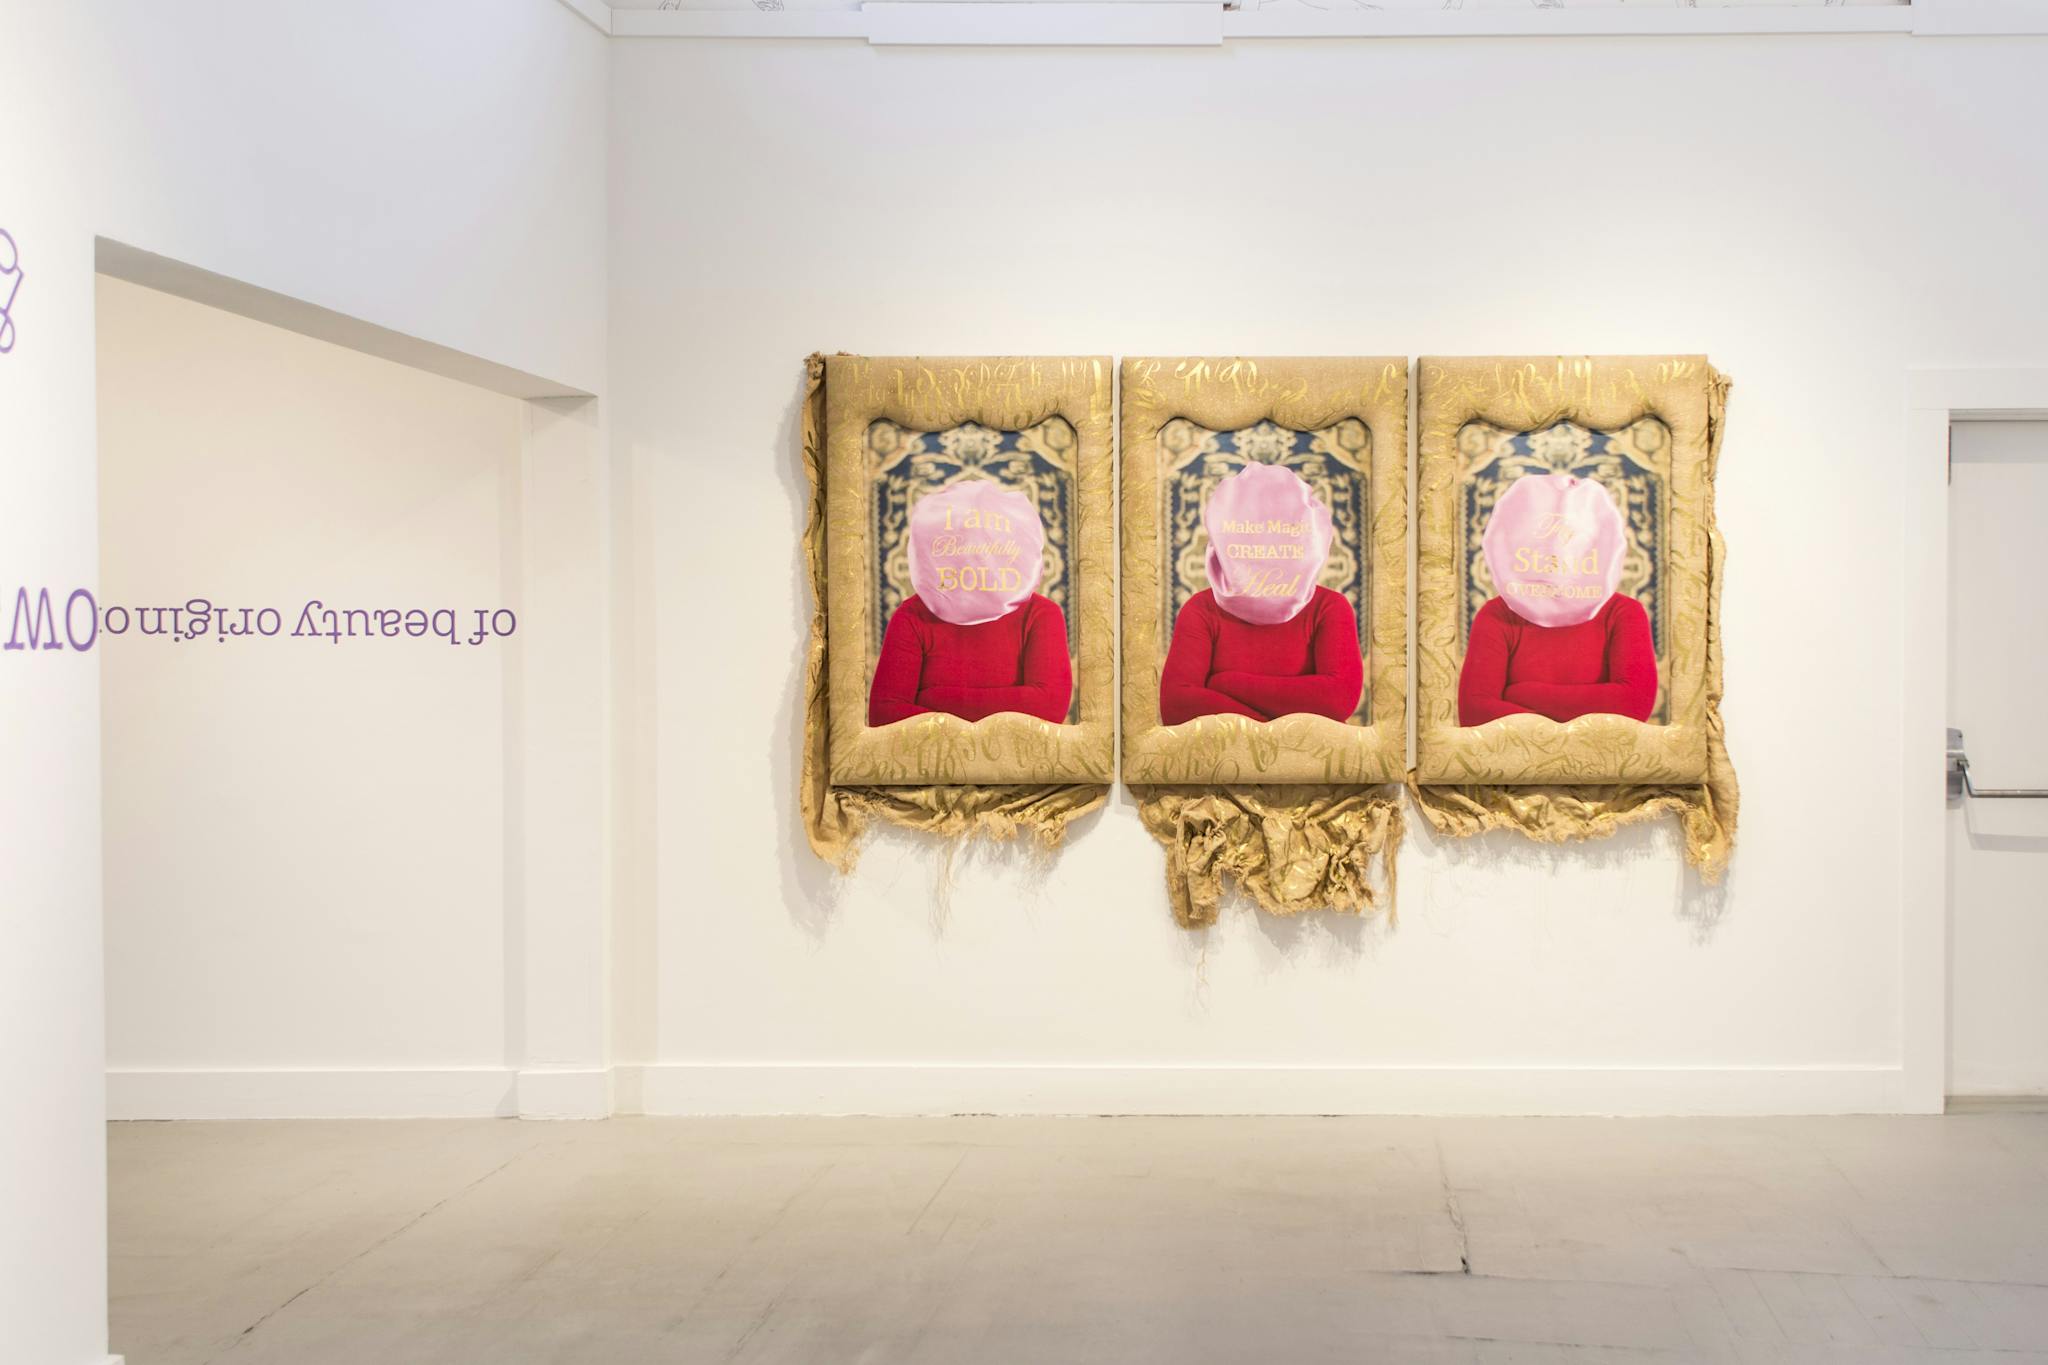 Three artworks display torsos of figures, their faces covered by pink shapes displaying text.